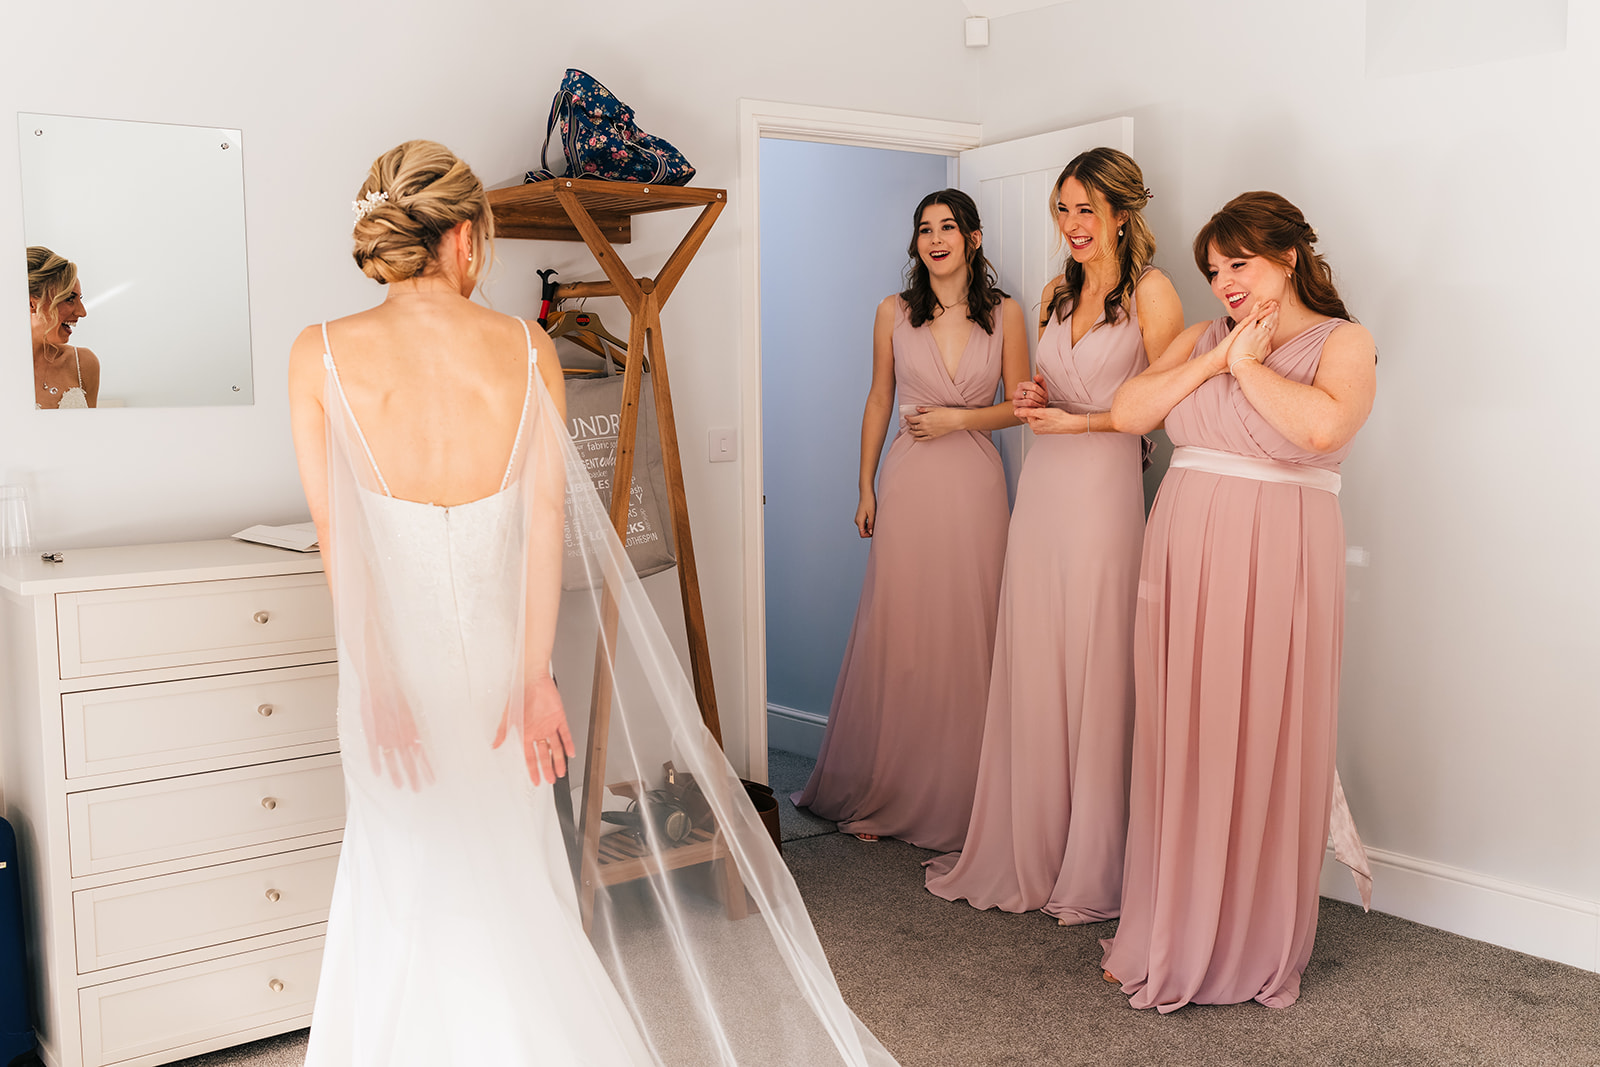 The bridesmaids reacting to seeing their friend in her wedding dress